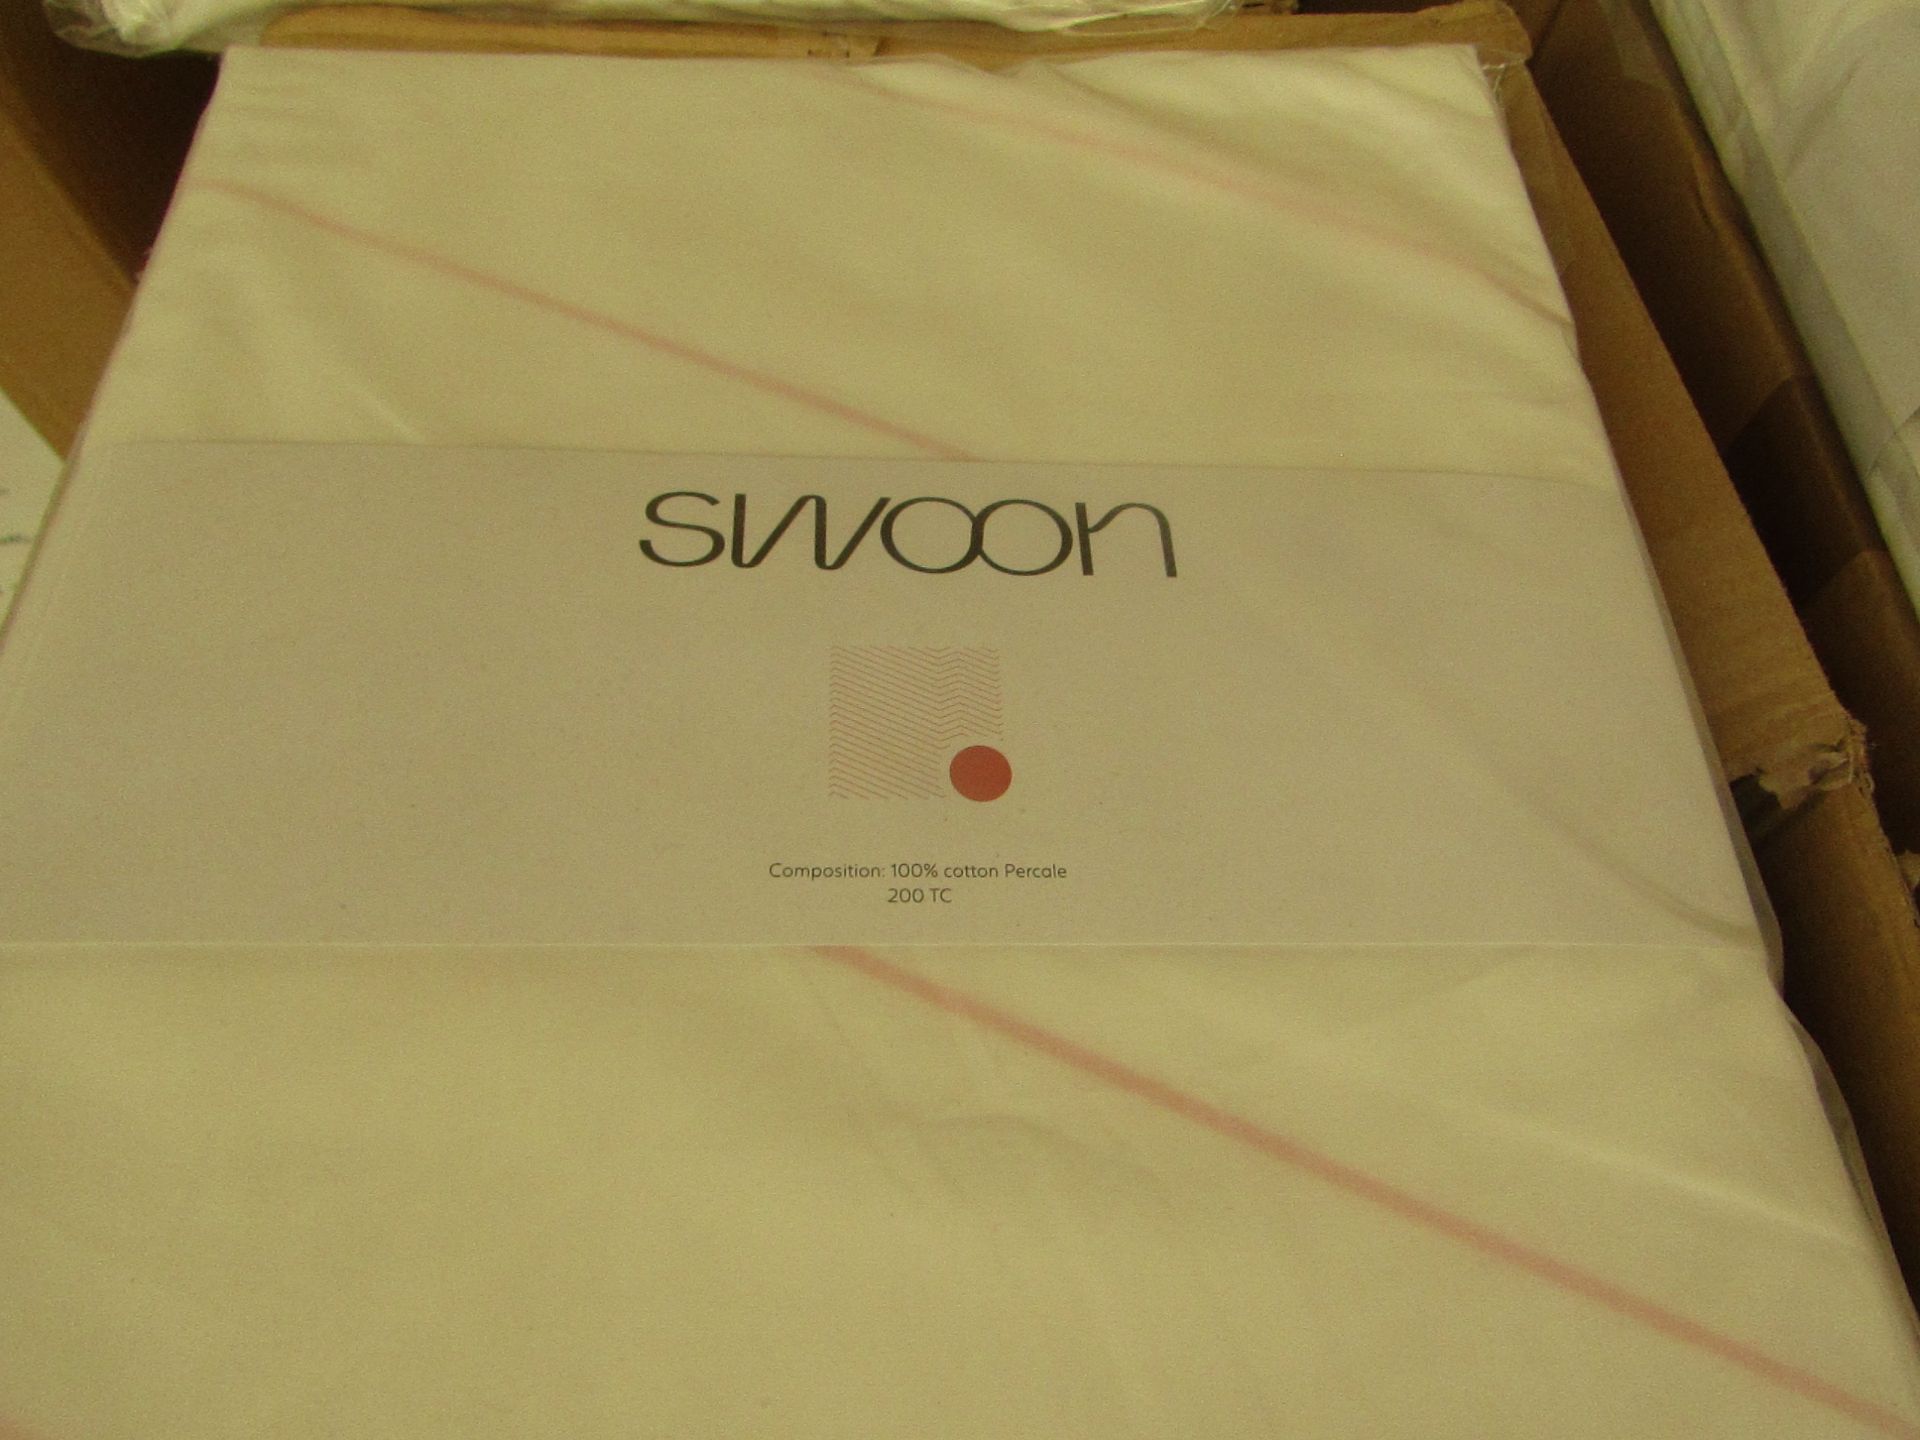 |1X | SWOON WILES PINK DOUBLE DUVET SET THAT INCLUDE DUVET COVER AND 2 MATCHING PILLOW CASES | NEW